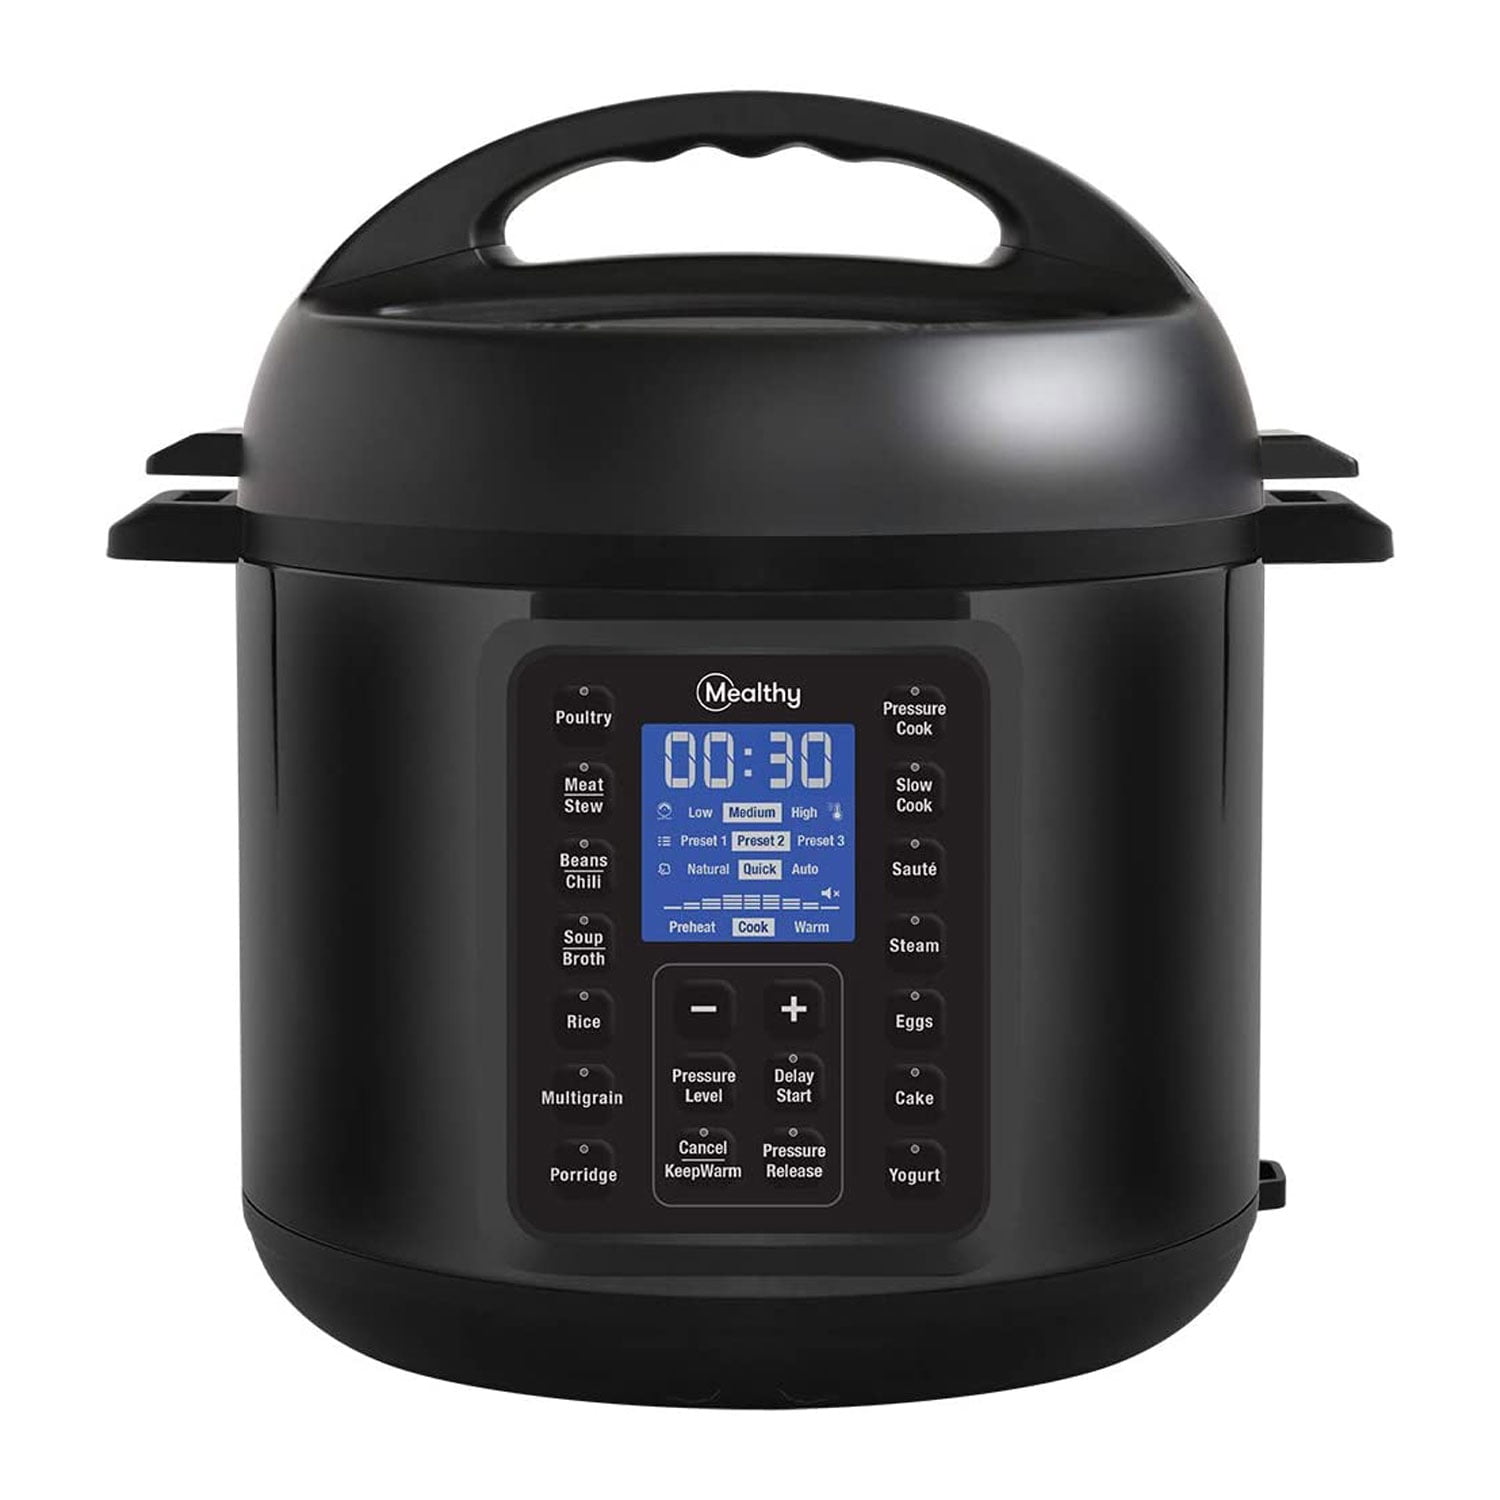 Electric Pressure Cooker Mealthy Review · The Typical Mom